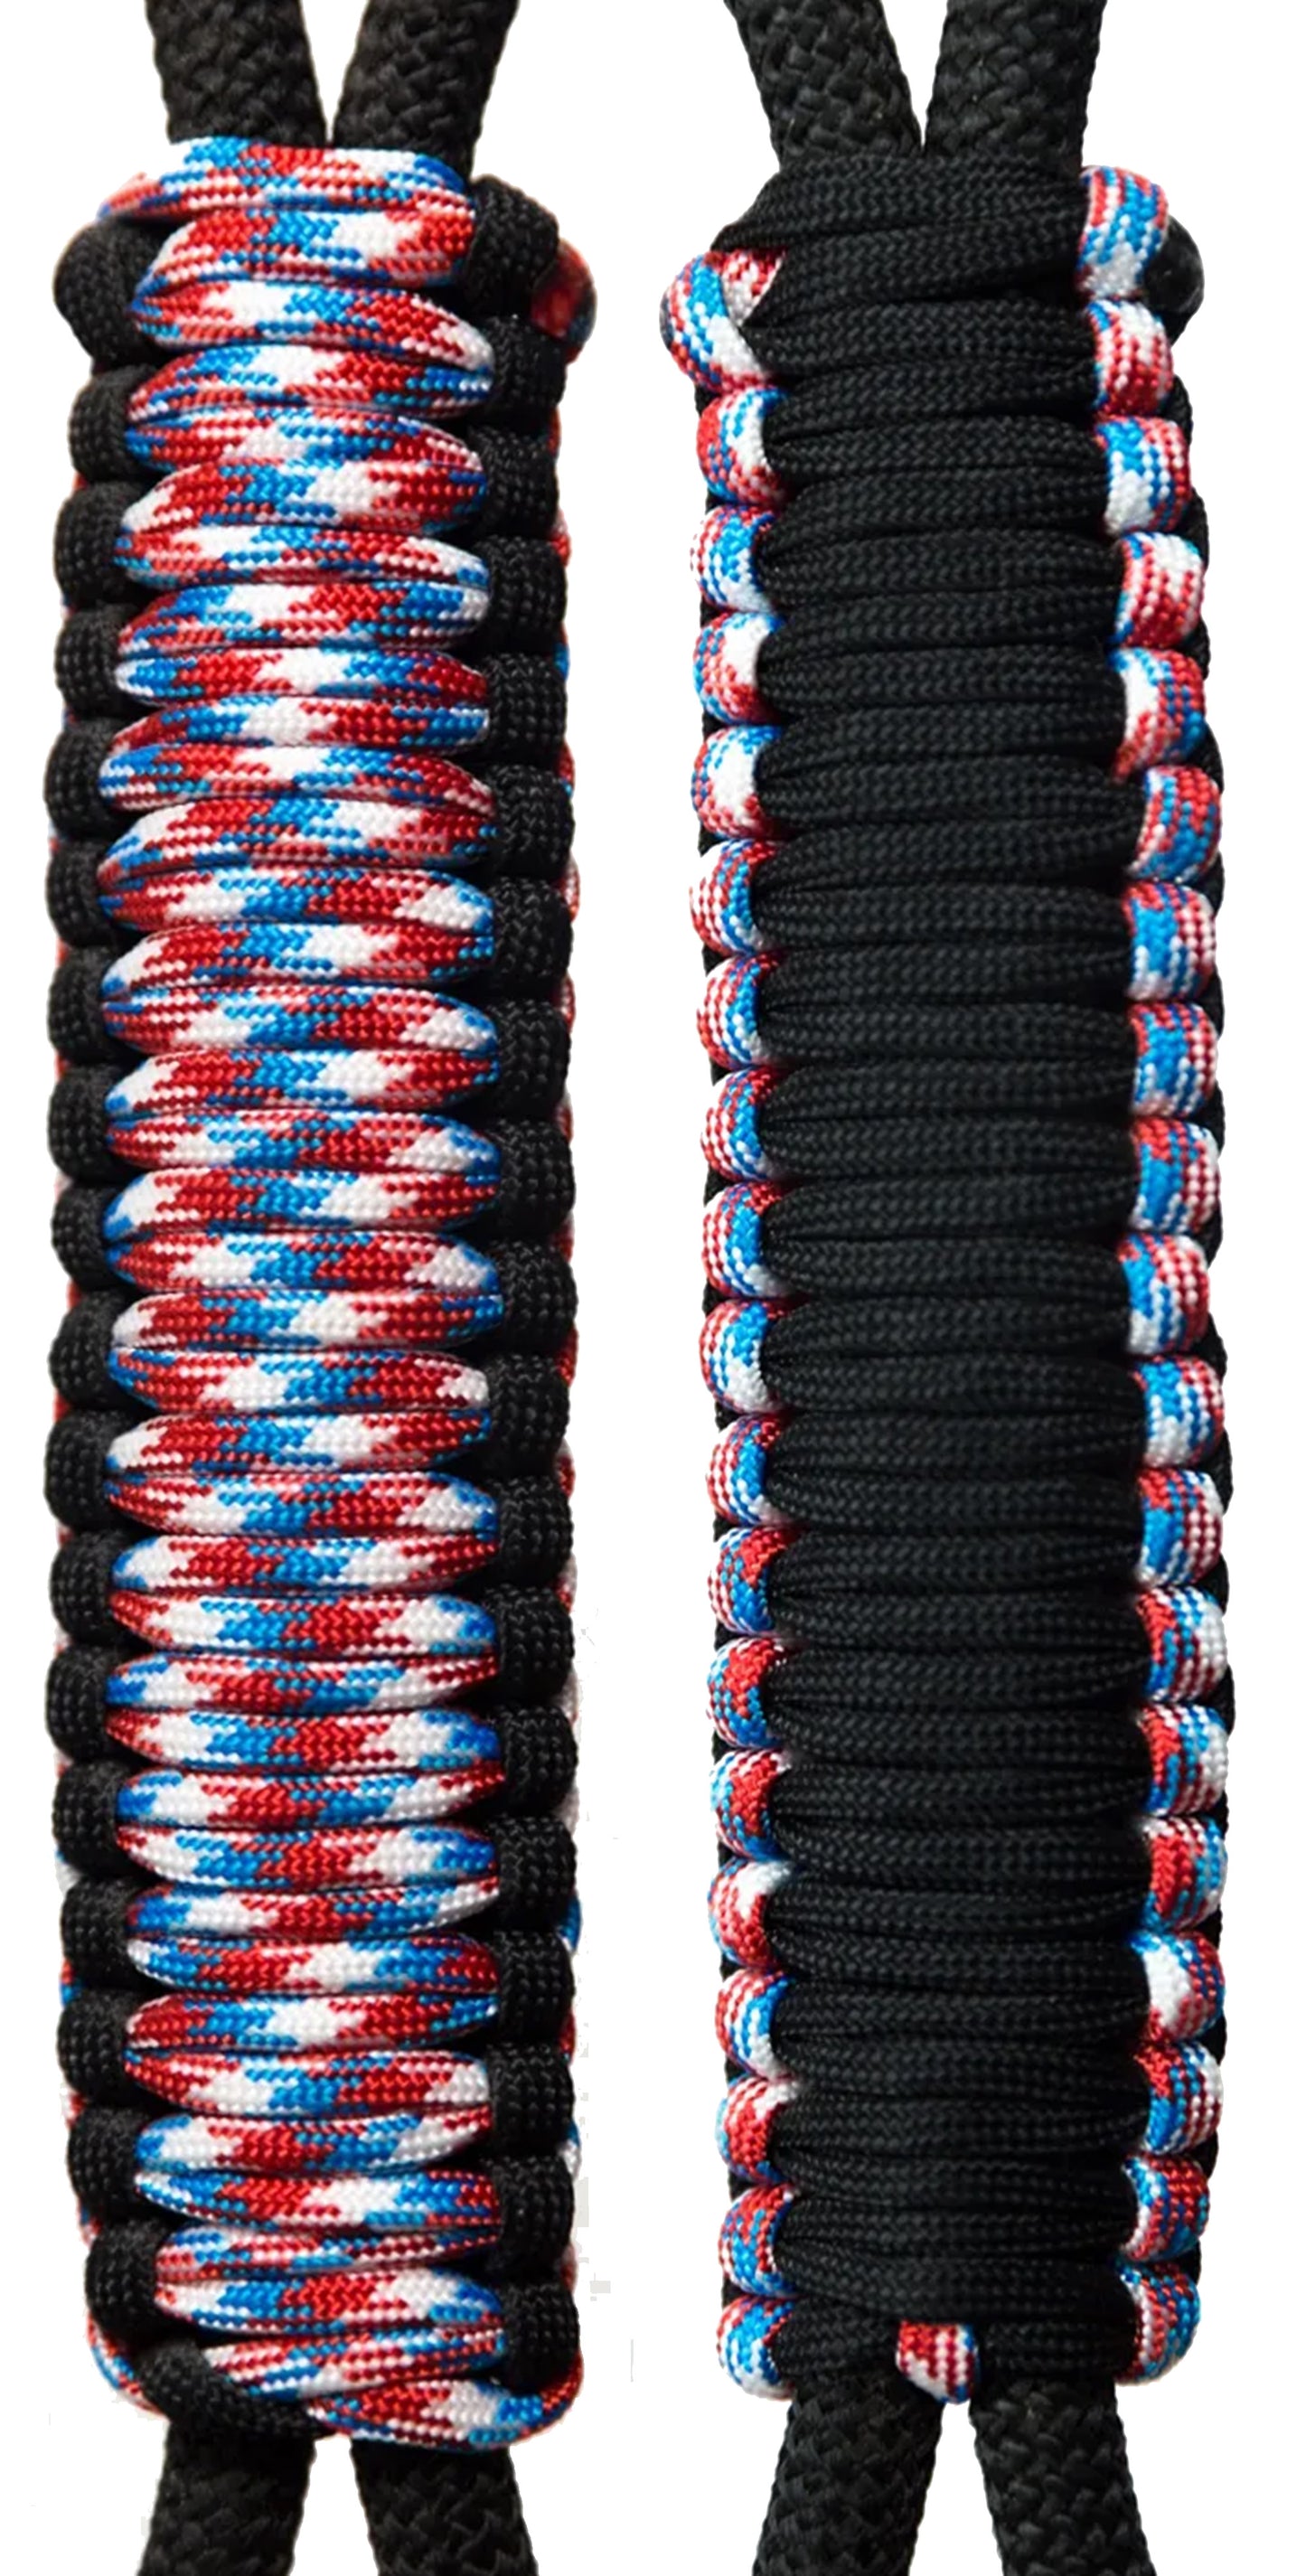 Black & Freedom C031C068 - Paracord Handmade Handles for Stainless Steel Tumblers - Made in USA!